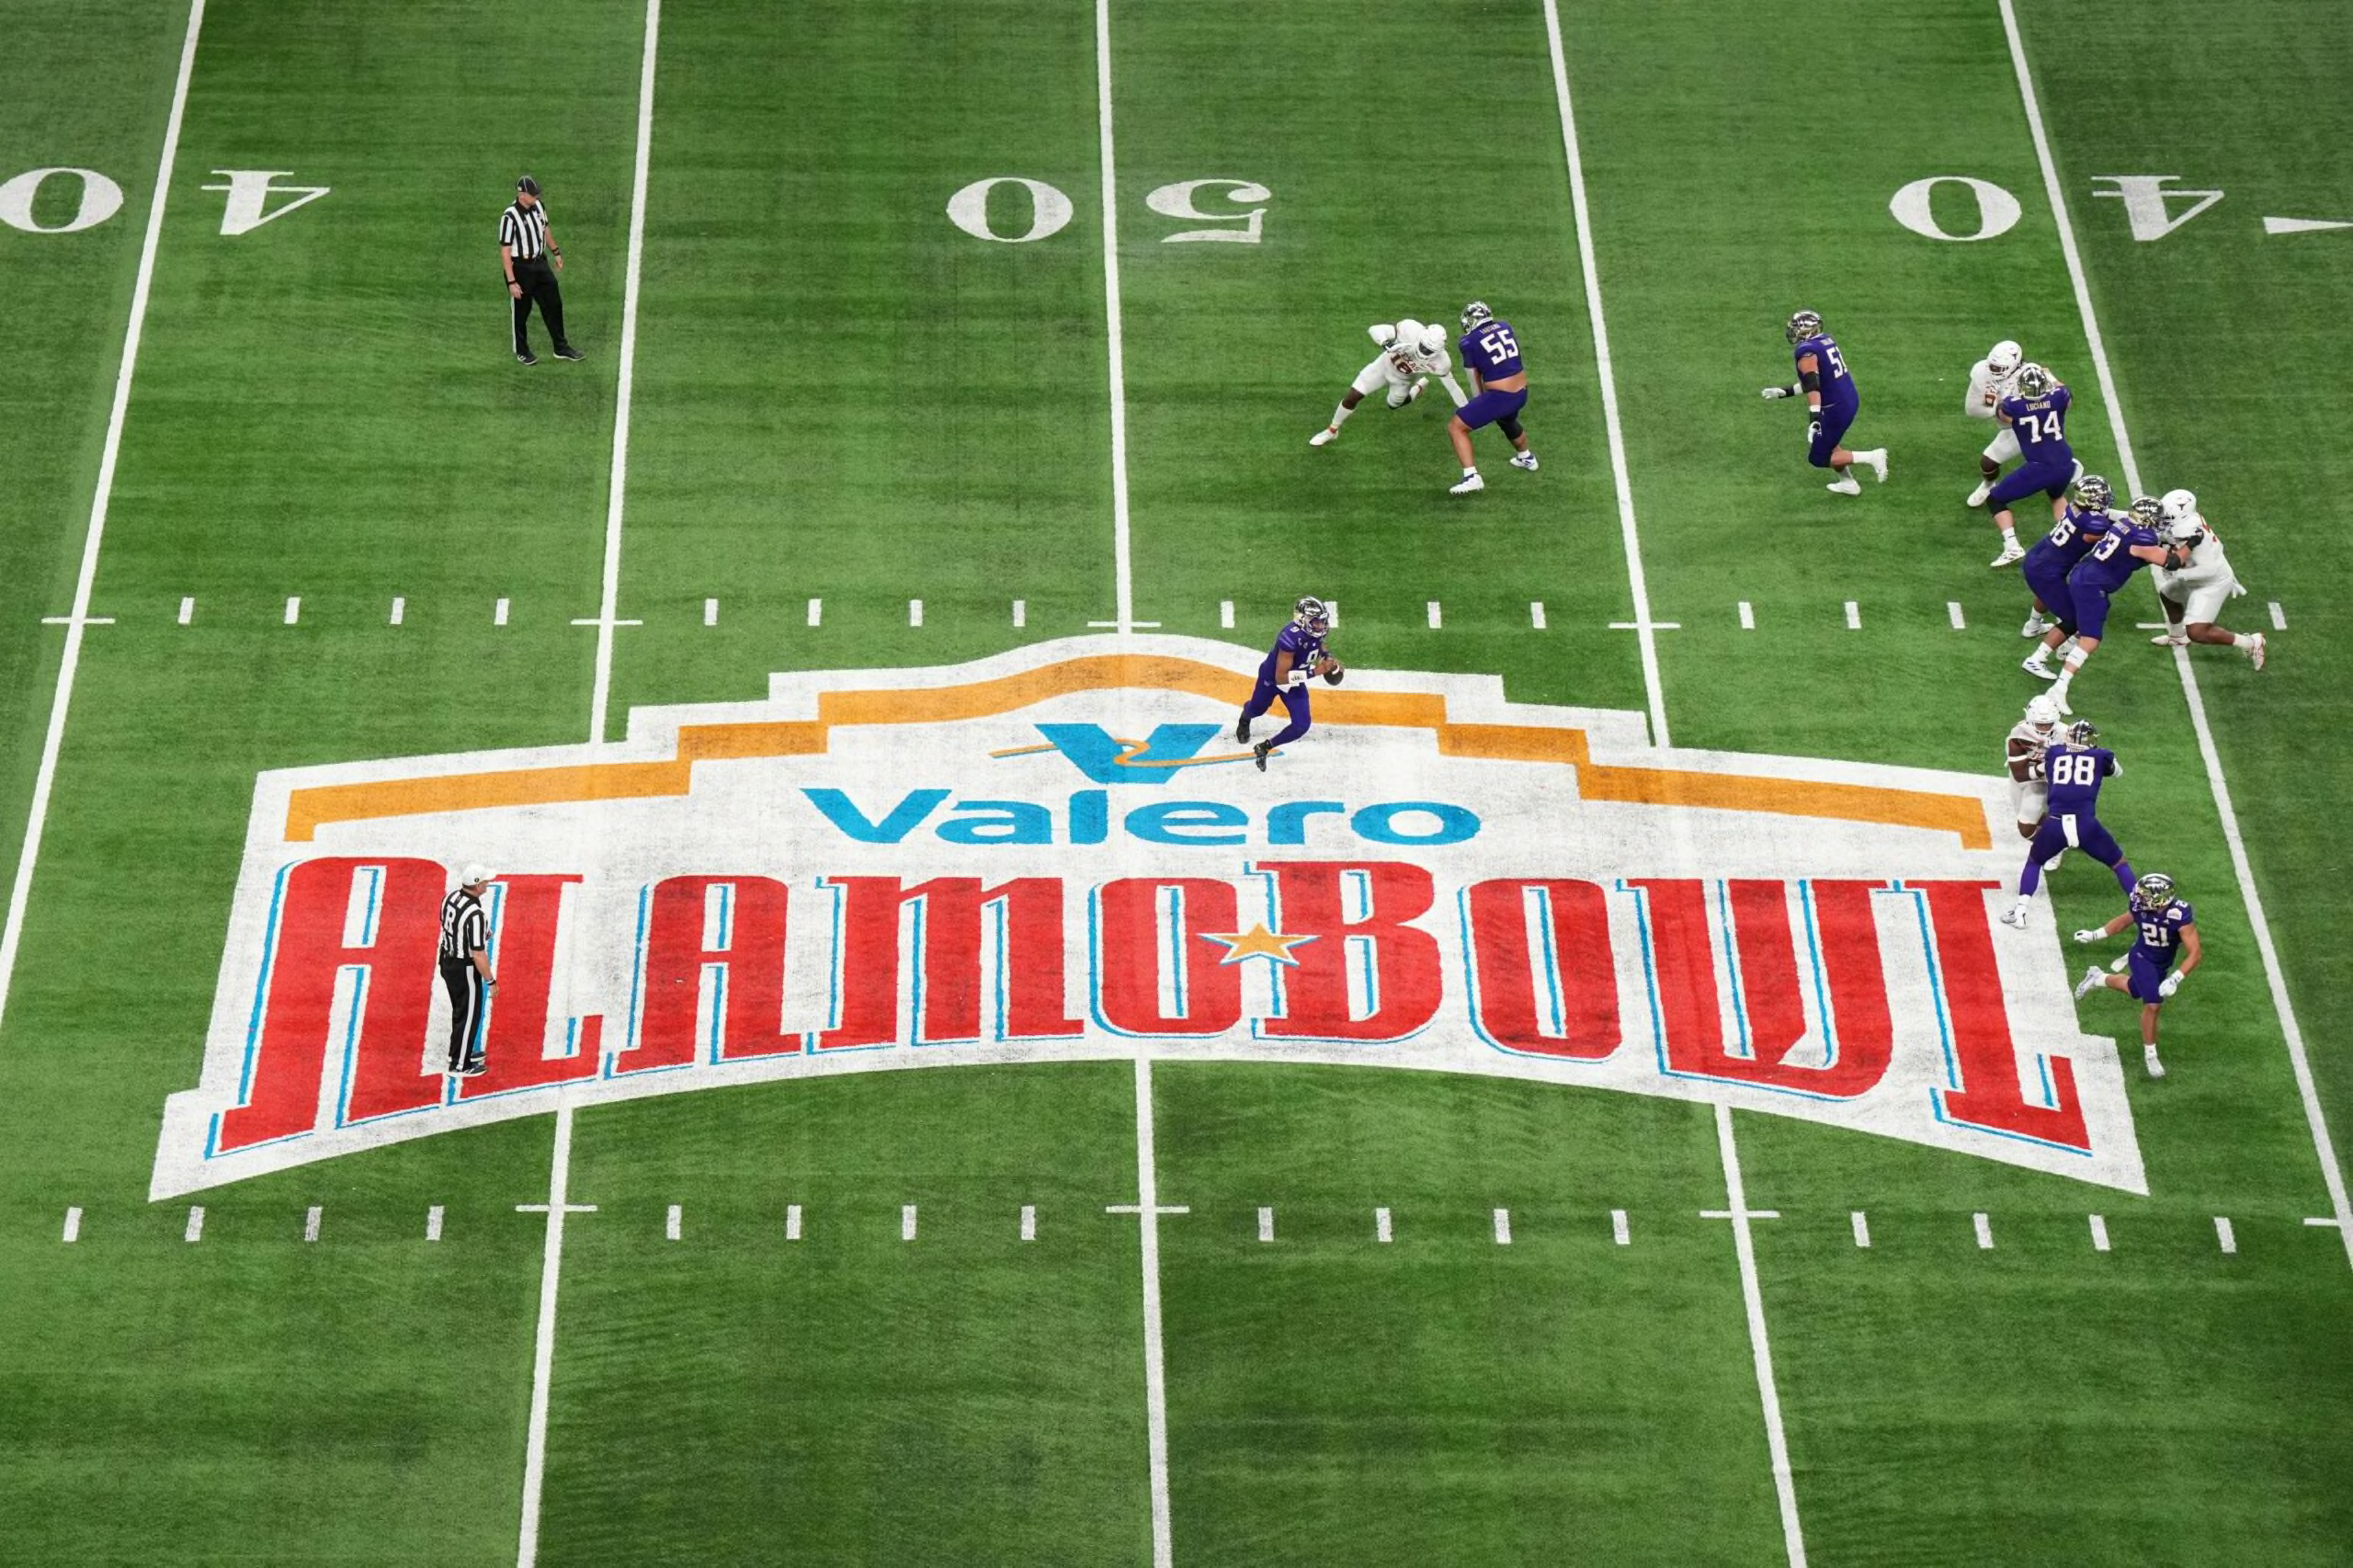 Here are 5 facts you may not have known about the Alamodome